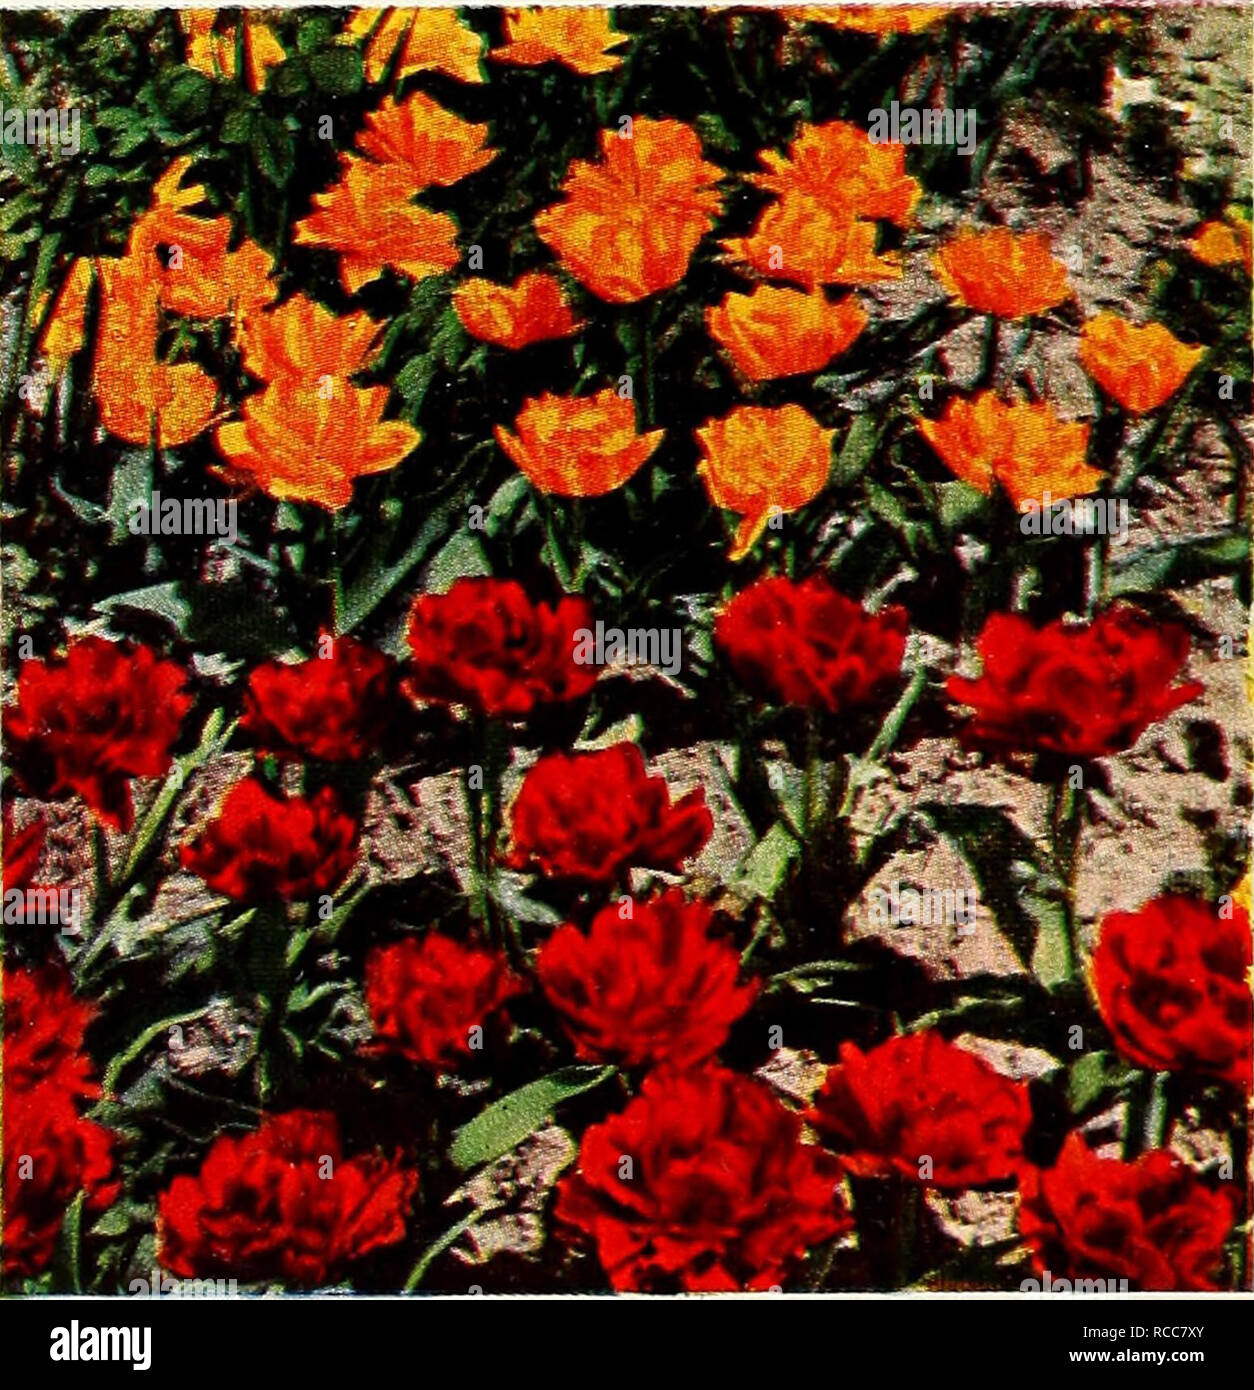 . Dreer's 1951 autumn catalog for spring beauty. Bulbs (Plants) Catalogs; Flowers Seeds Catalogs; Gardening Equipment and supplies Catalogs; Nurseries (Horticulture) Catalogs; Vegetables Seeds Catalogs. PARROT TULIP, THERESE TULIP SPICE • . Everything Nice To Make Your Spring Garden Flavorful and Complete PARROTS for Talking Color One of ISIature's Most Artistic Creations Blue Parrot. A subtle, harmonious blend of several exquisite blue and heliotrope shades. Very sturdy. BT 405 A. .5 for 70c; 10 for $1.2.5; 25 for $2.80. Orange Favorite. Beautifully slashed petals of rich glowing orange with  Stock Photo